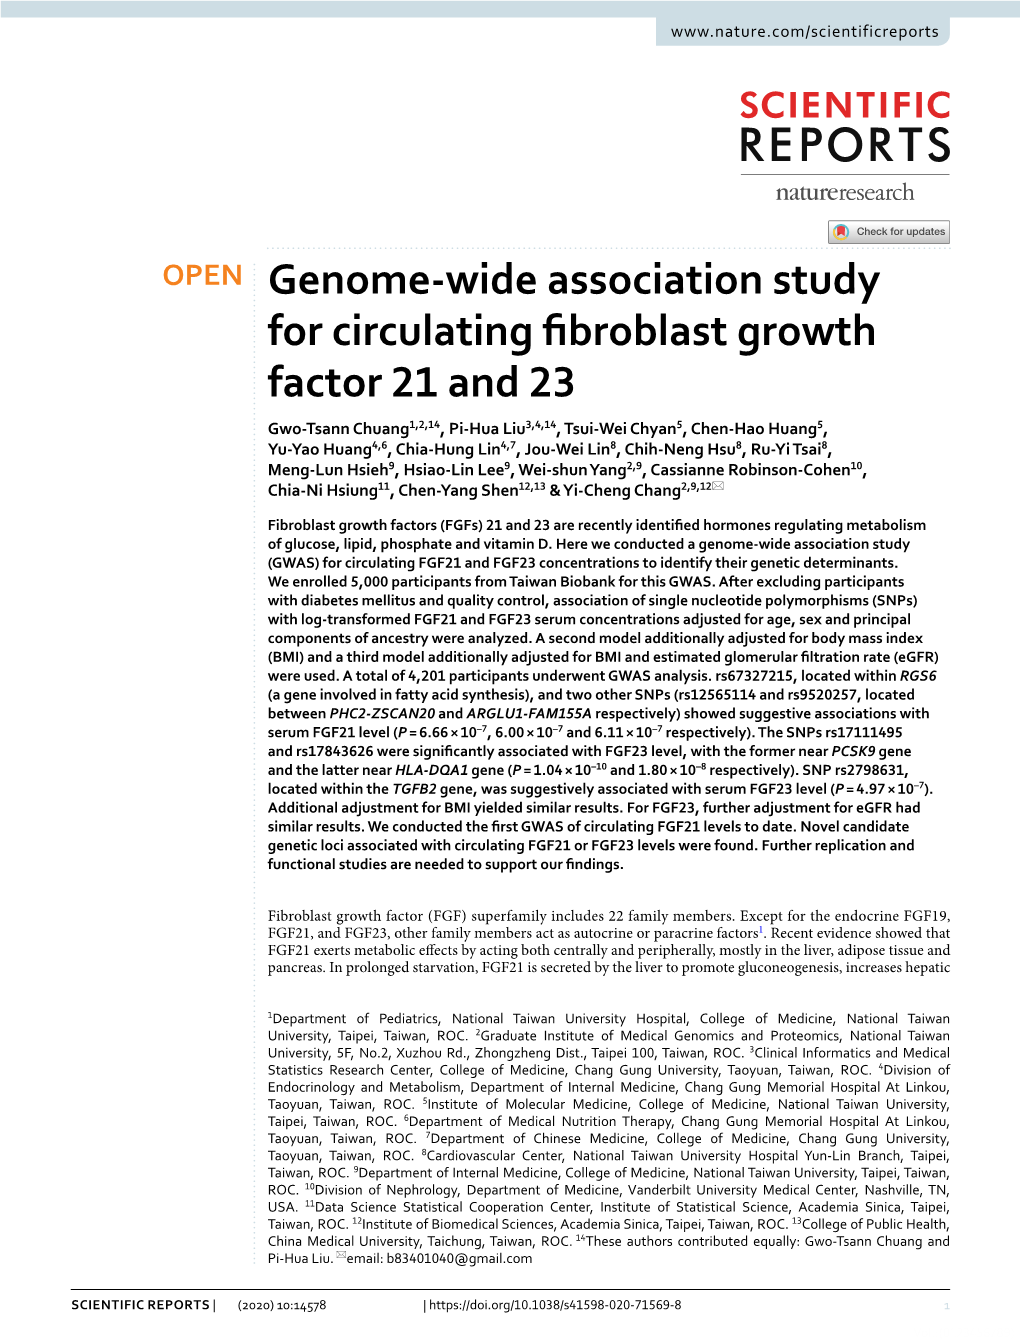 Genome-Wide Association Study for Circulating Fibroblast Growth Factor